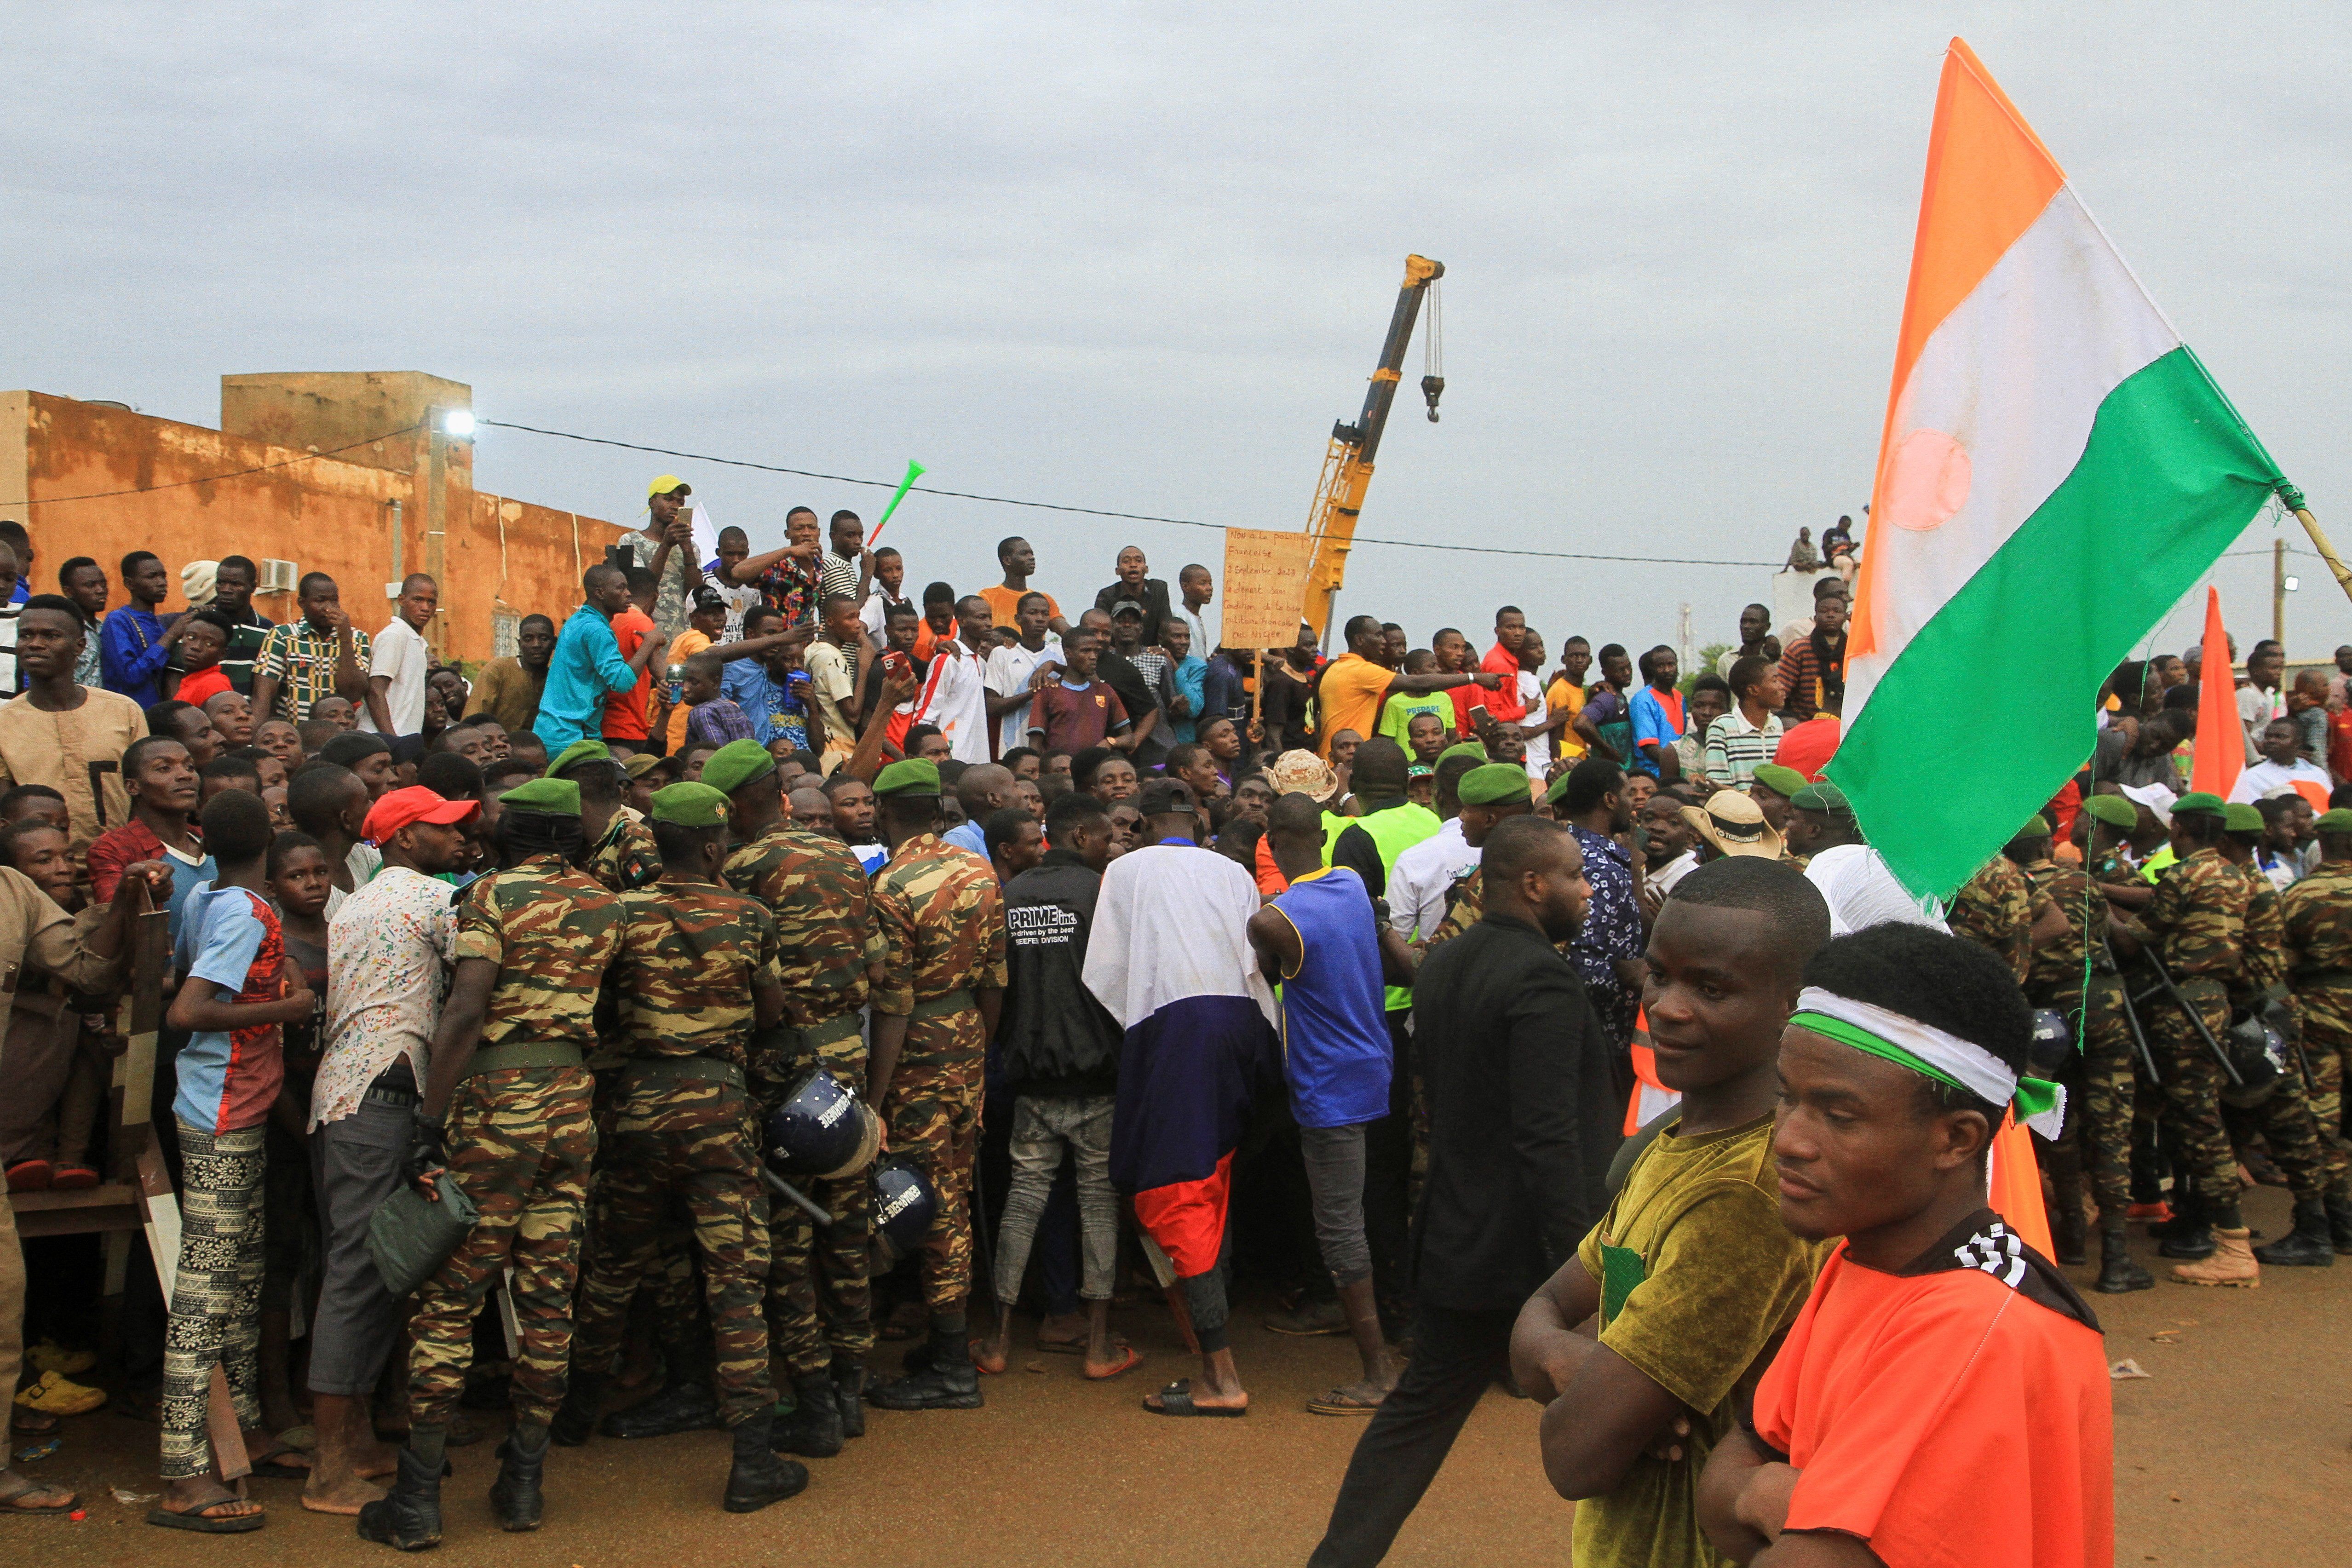 Thousands of Nigeriens gather in front of the French army headquarter, in support of the putschist soldiers and to demand the French army to leave, in Niamey, Niger.